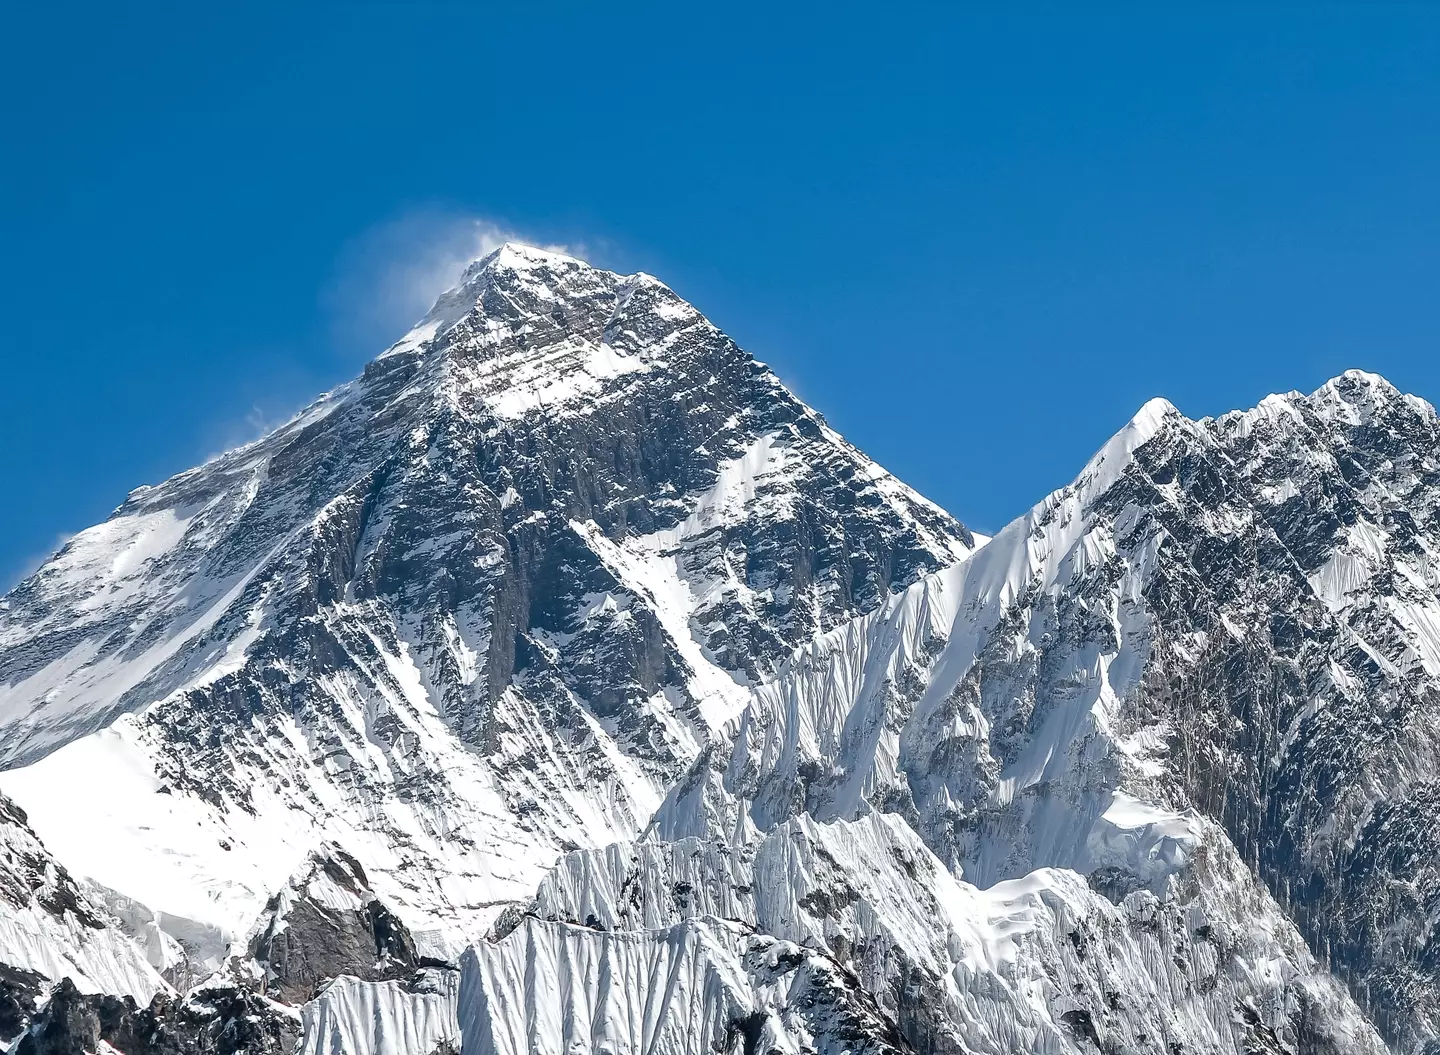 Dead bodies left on top of Mount Everest are warning to climbers